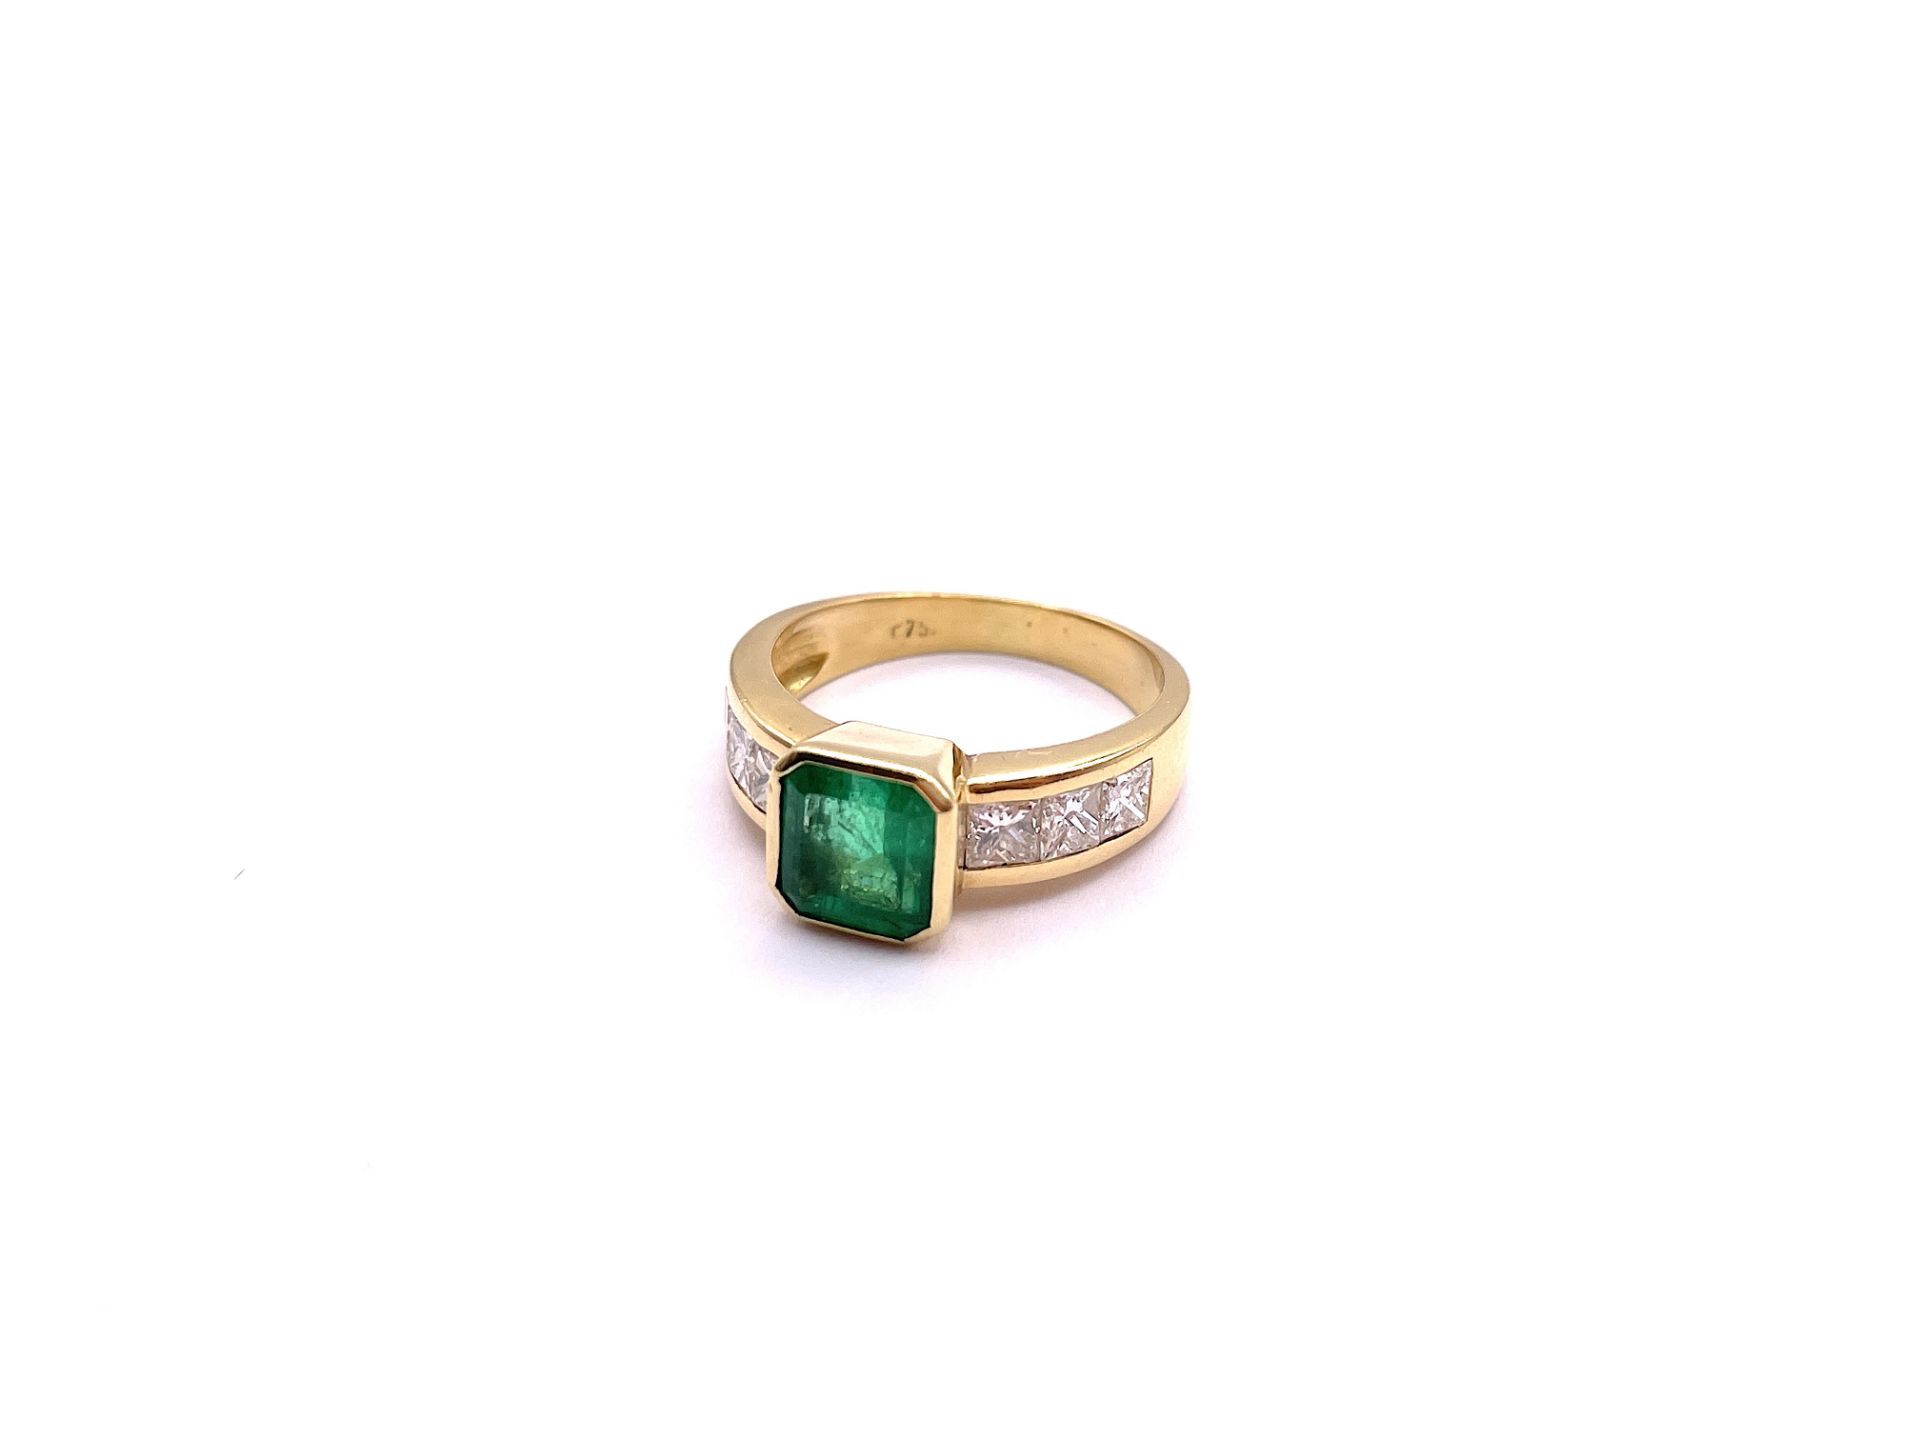 Emerald ring - Image 5 of 5